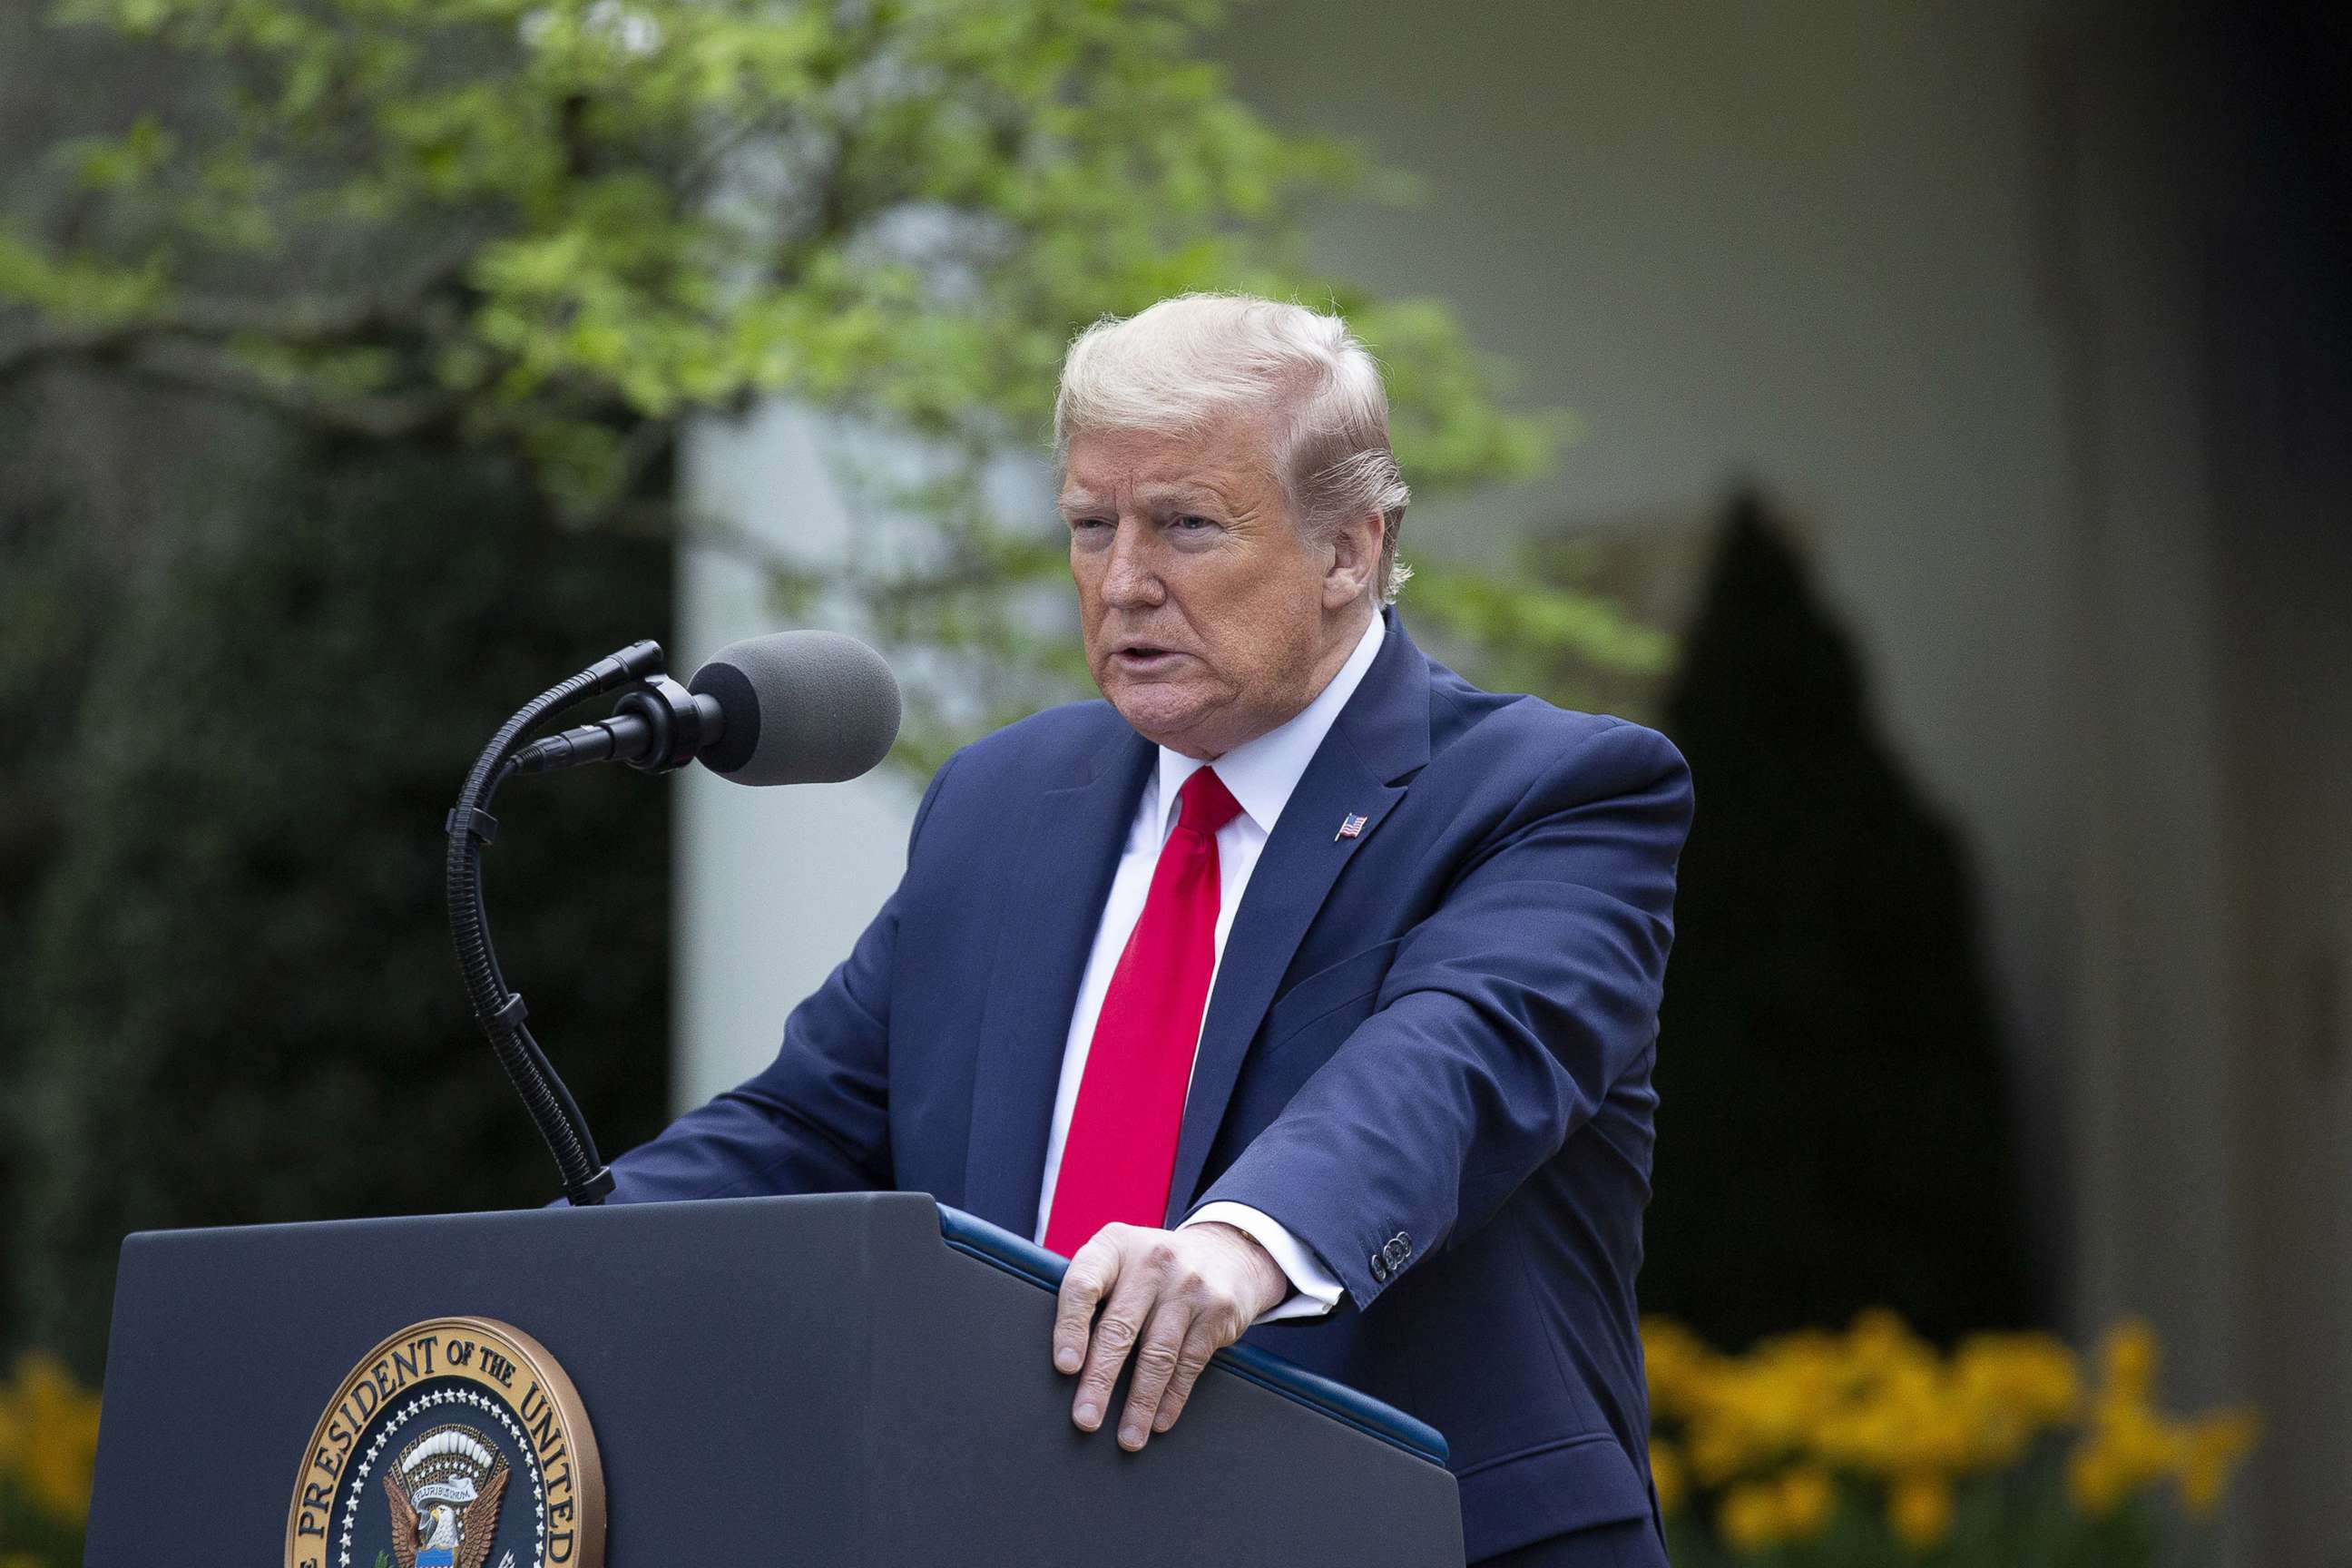 PHOTO: President Donald Trump delivers remarks during a news conference in the Rose Garden of the White House in Washington D.C., April 14, 2020.